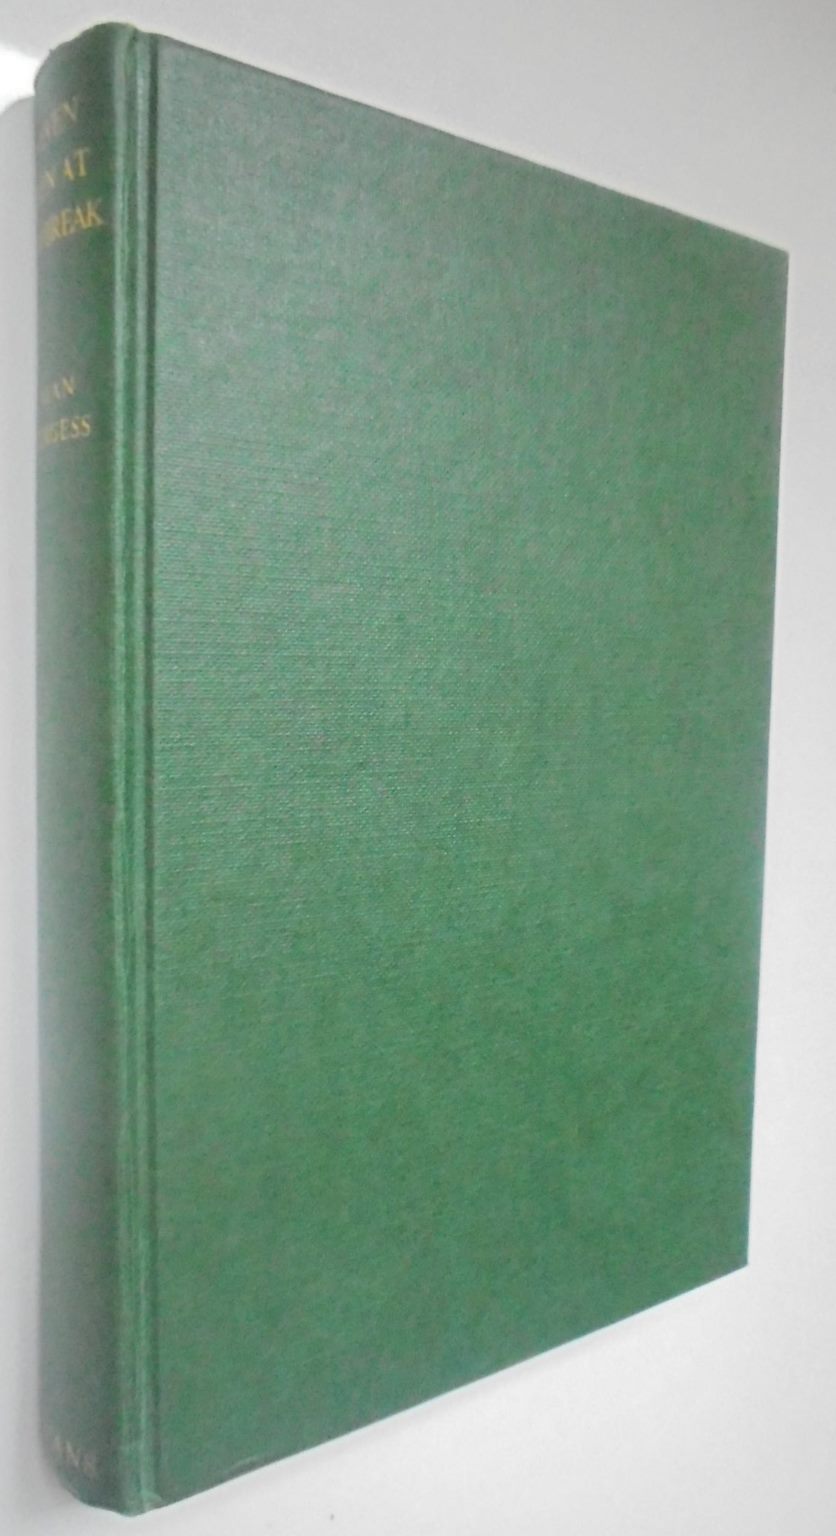 Seven Men at Daybreak - by Alan Burgess. [First Edition]